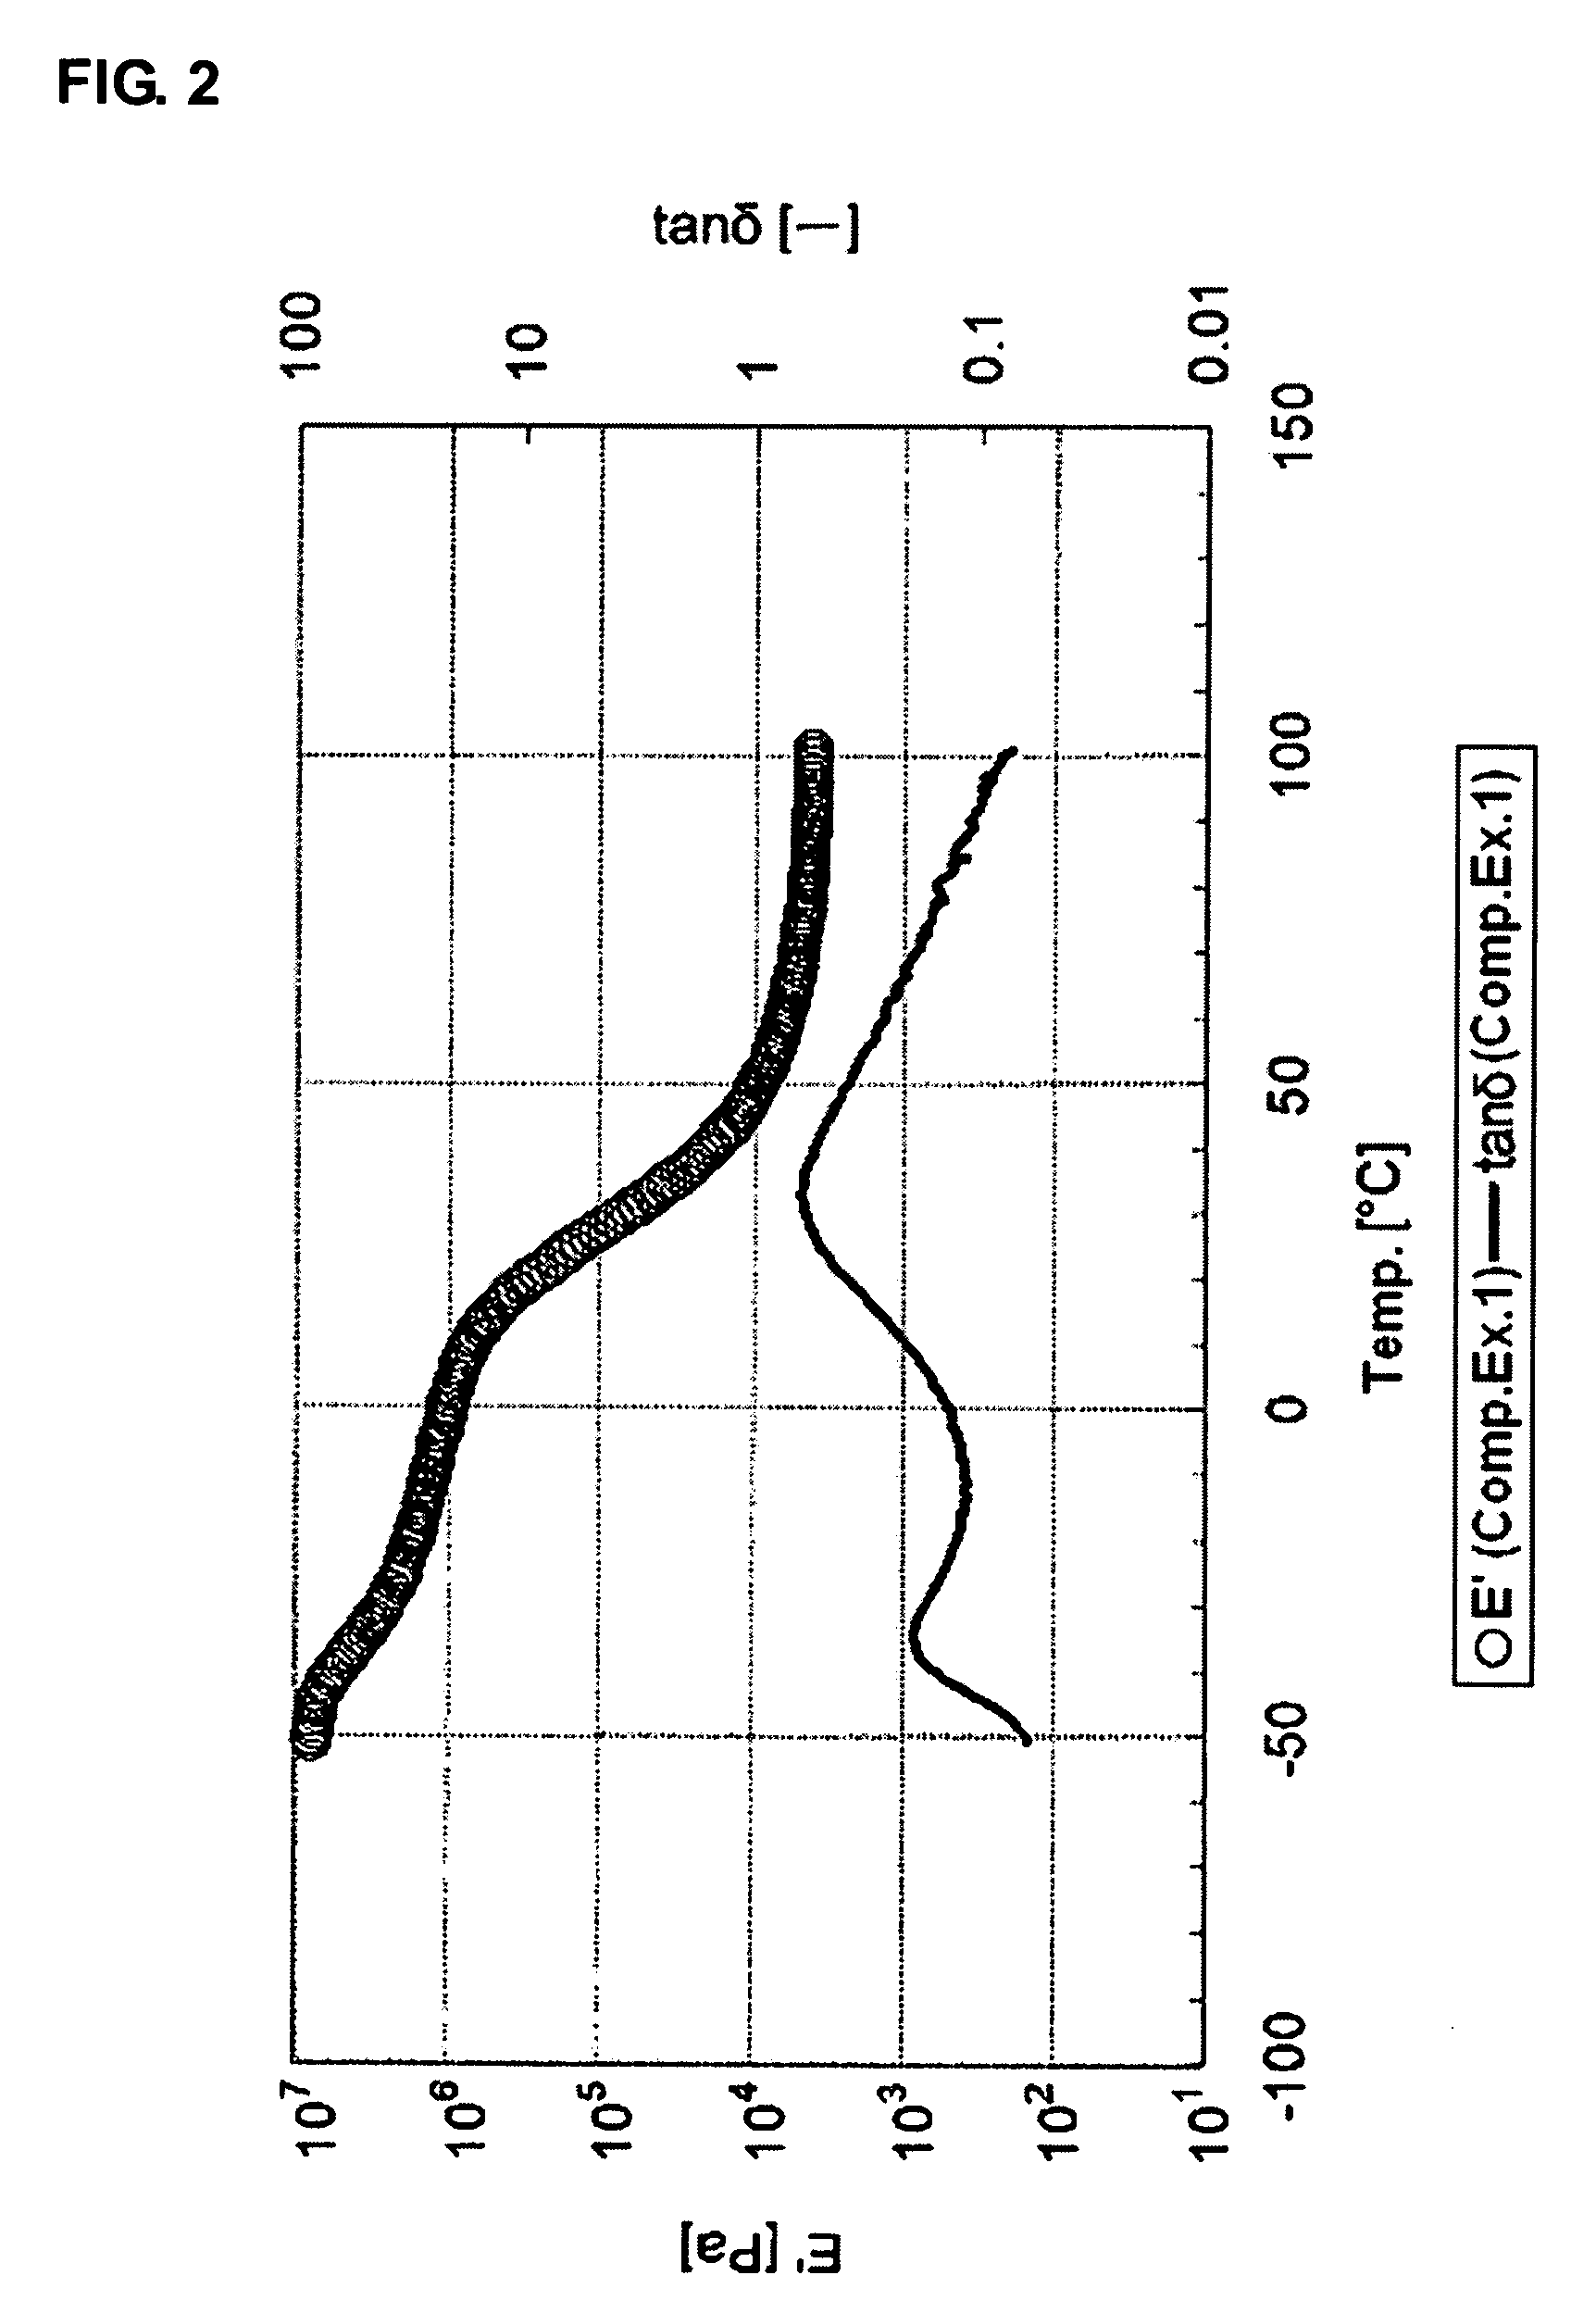 Composition for Polyurethane Foam, Polyurethane Foam Obtained From the Composition, and Use Thereof